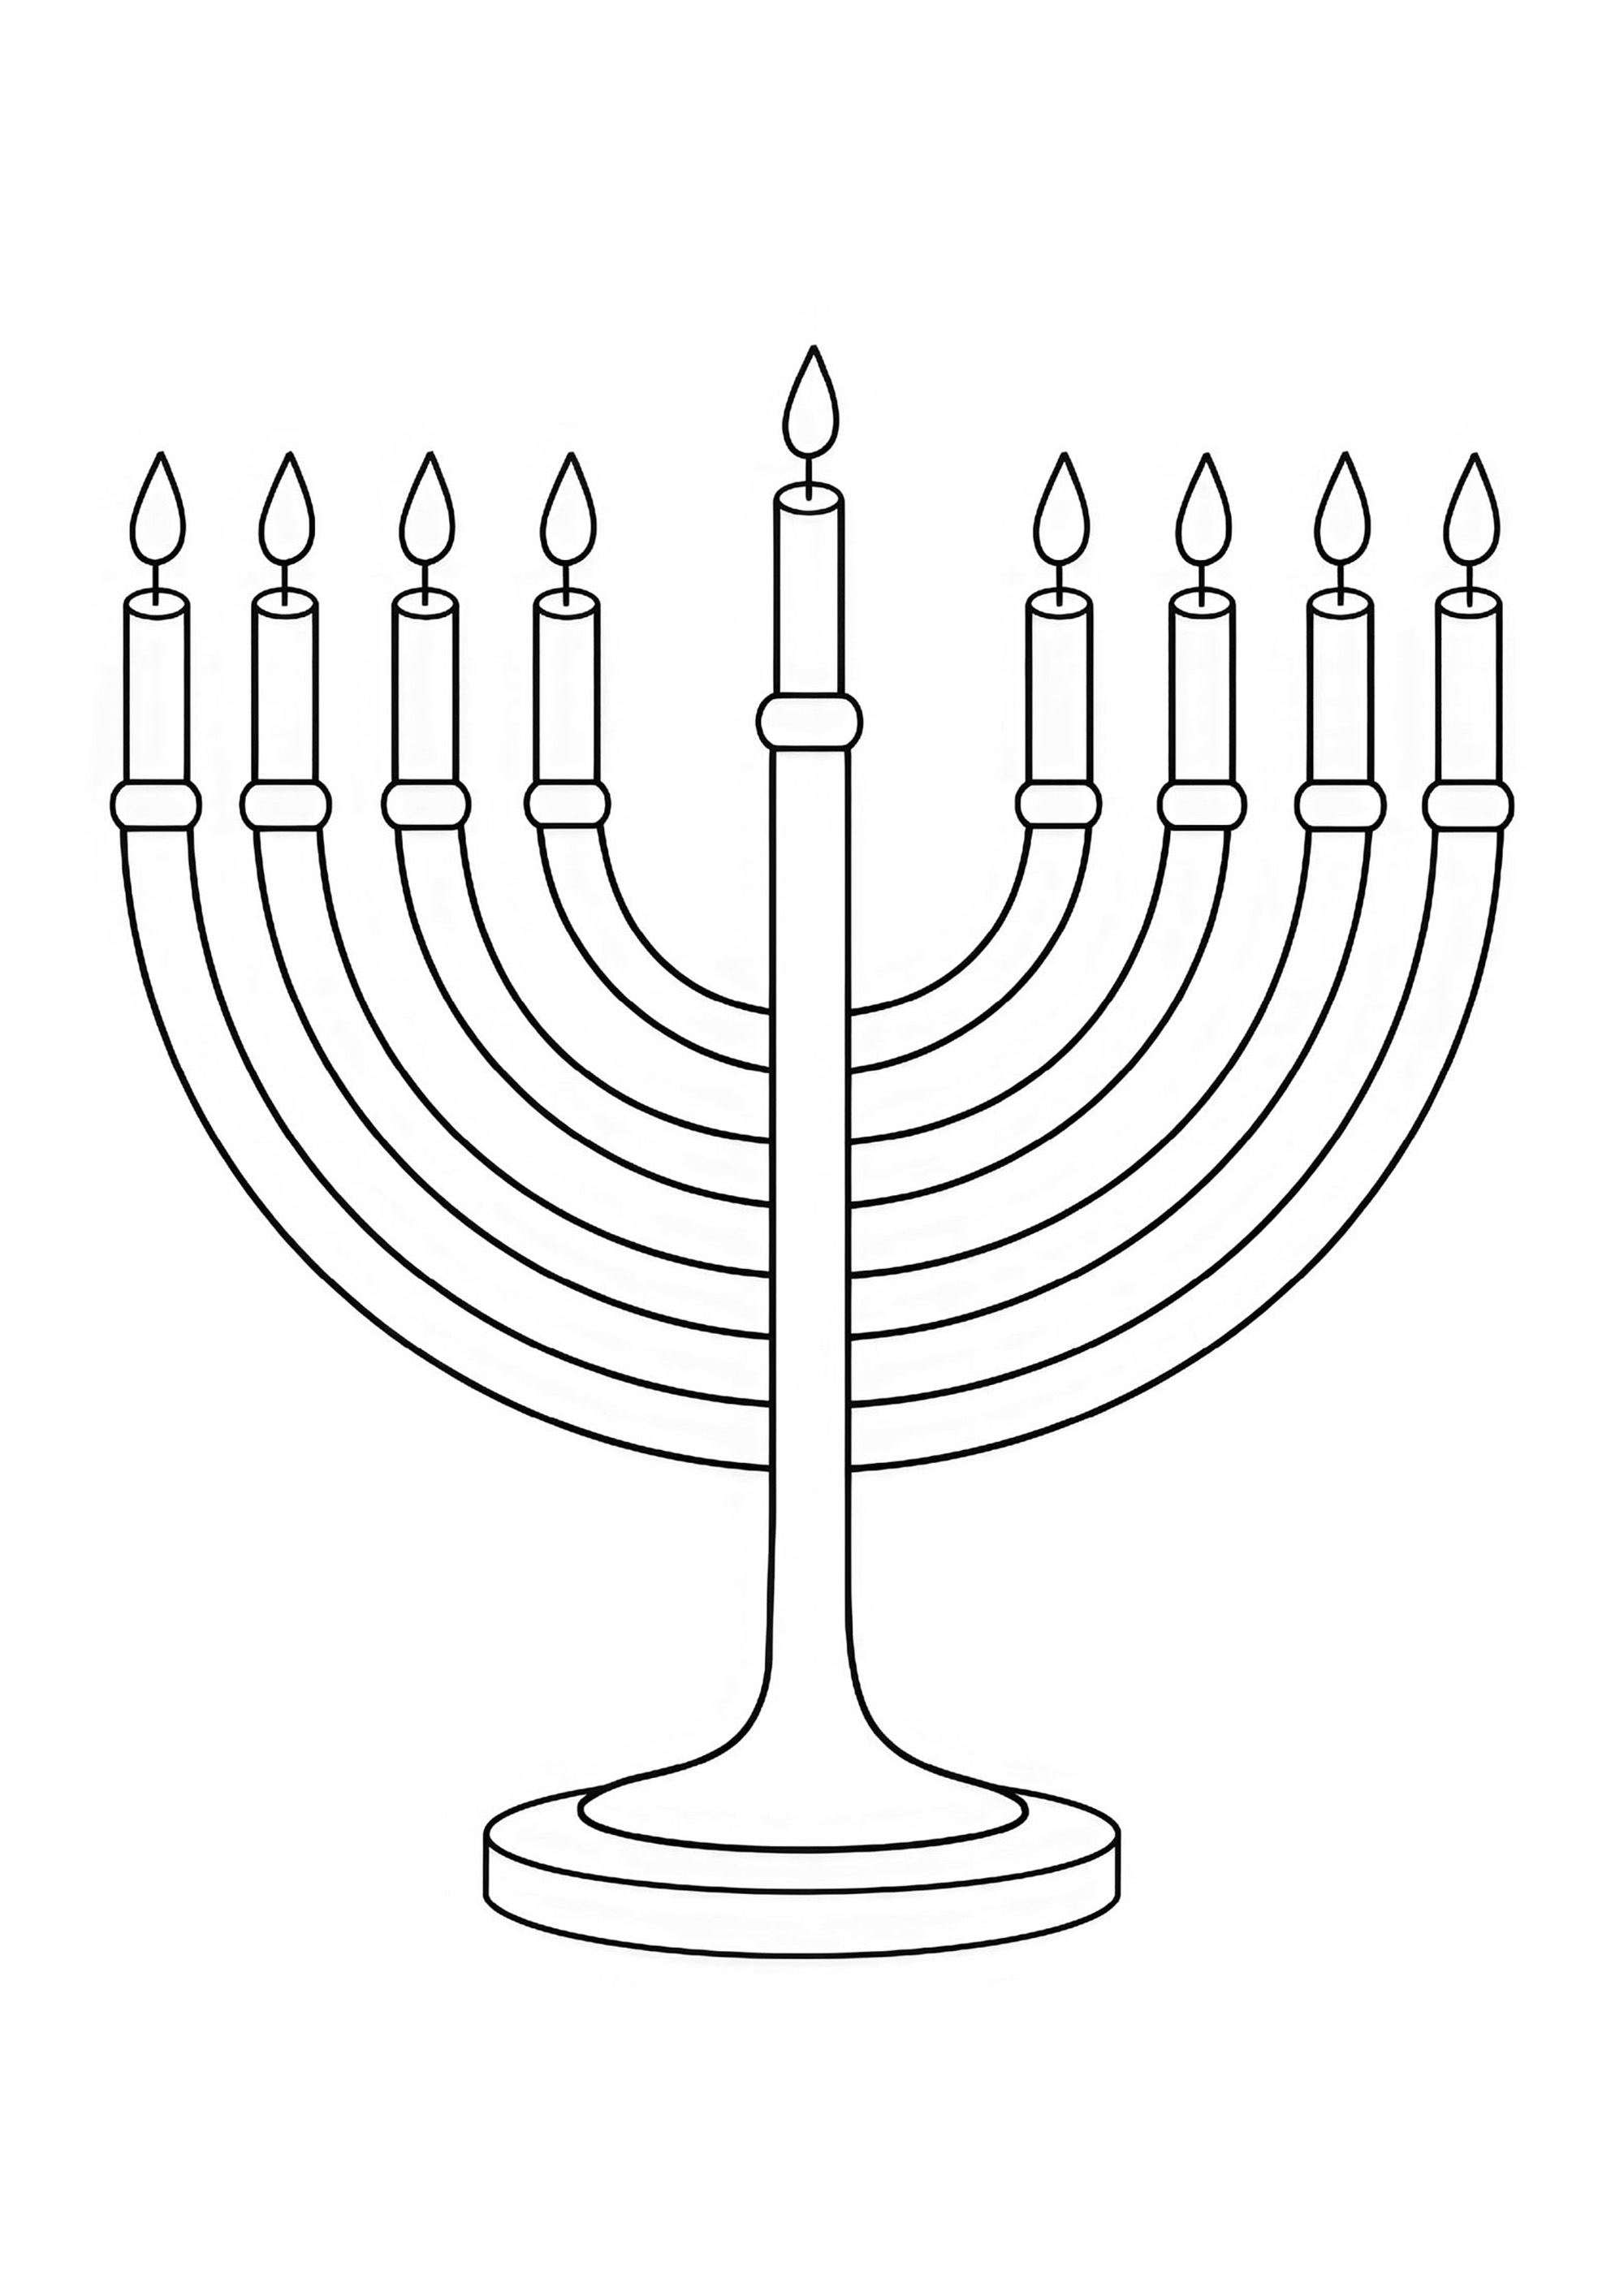 Coloriage Menorah. The Menorah is a seven-branched candlestick used by Jews from the 8th century onwards.